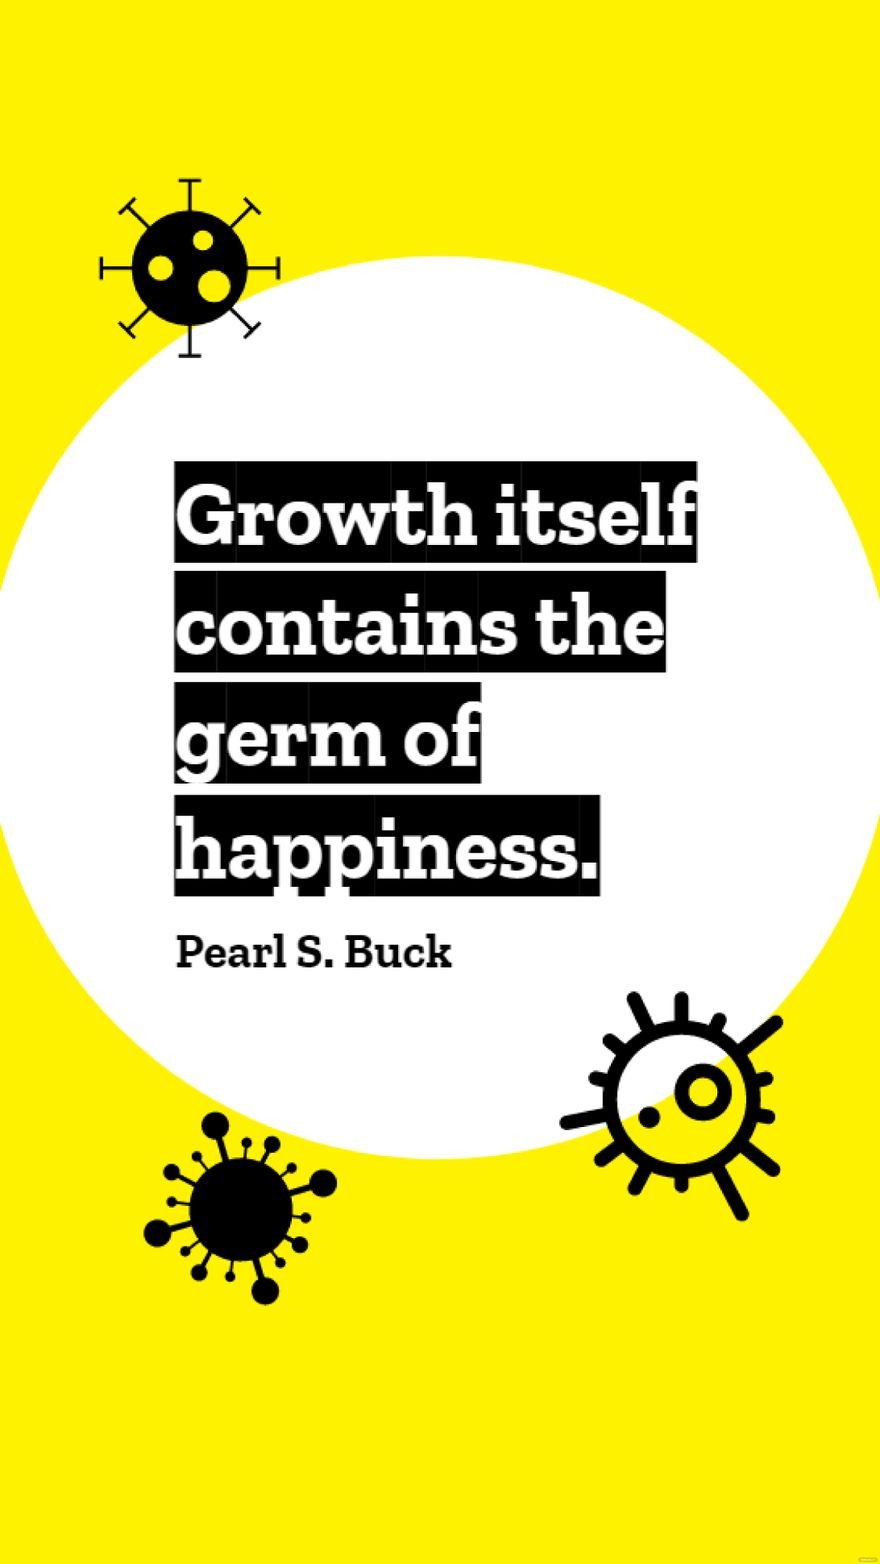 Free Pearl S. Buck - Growth itself contains the germ of happiness.